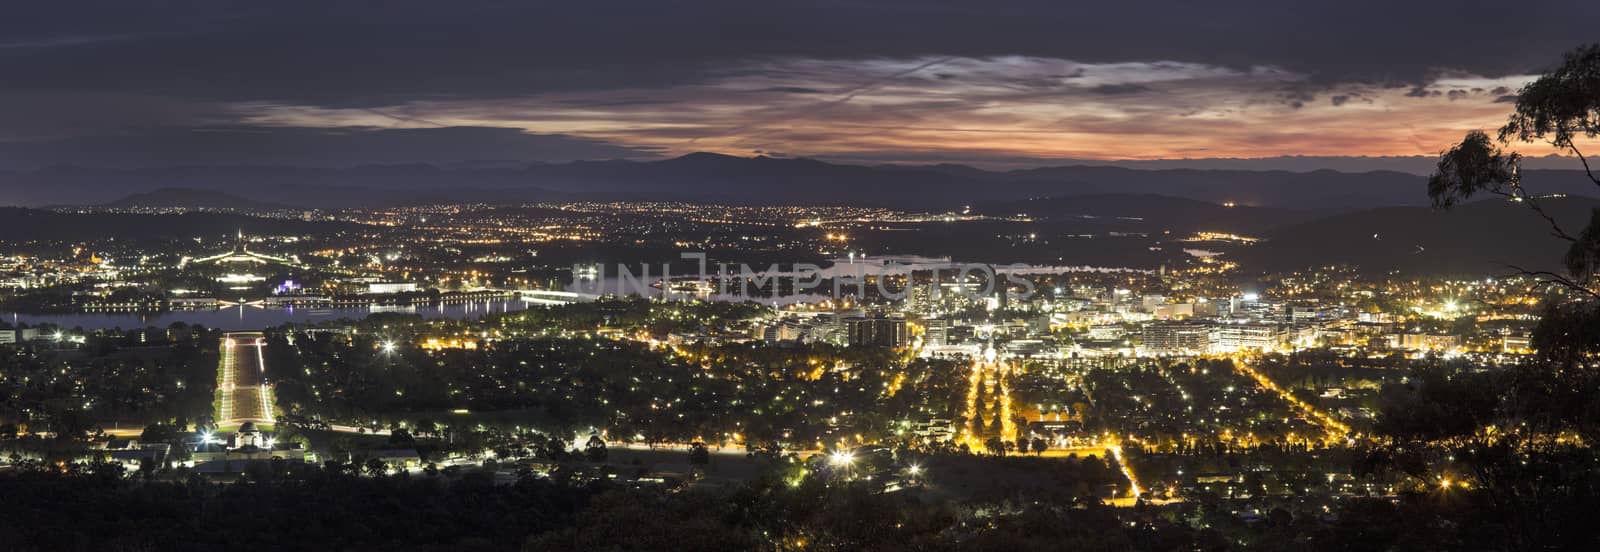 Panoramic view of Canberra at sunset by benkrut